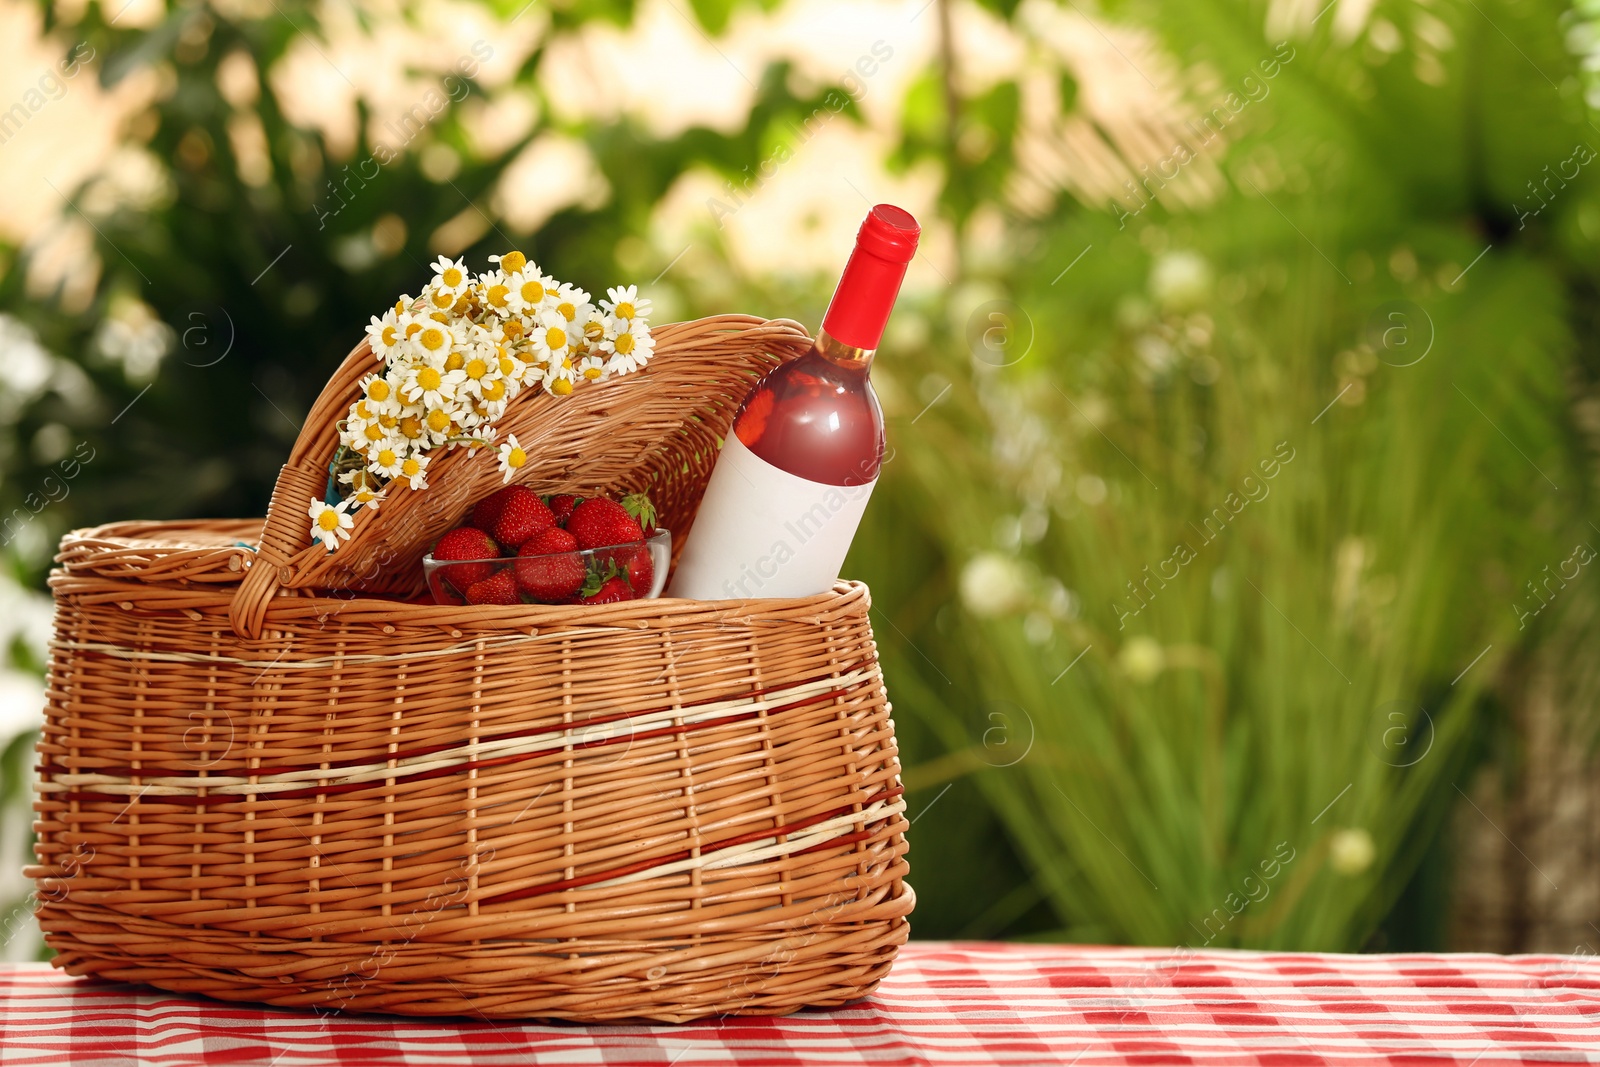 Photo of Picnic basket with wine, strawberries and flowers on checkered tablecloth against blurred background, space for text